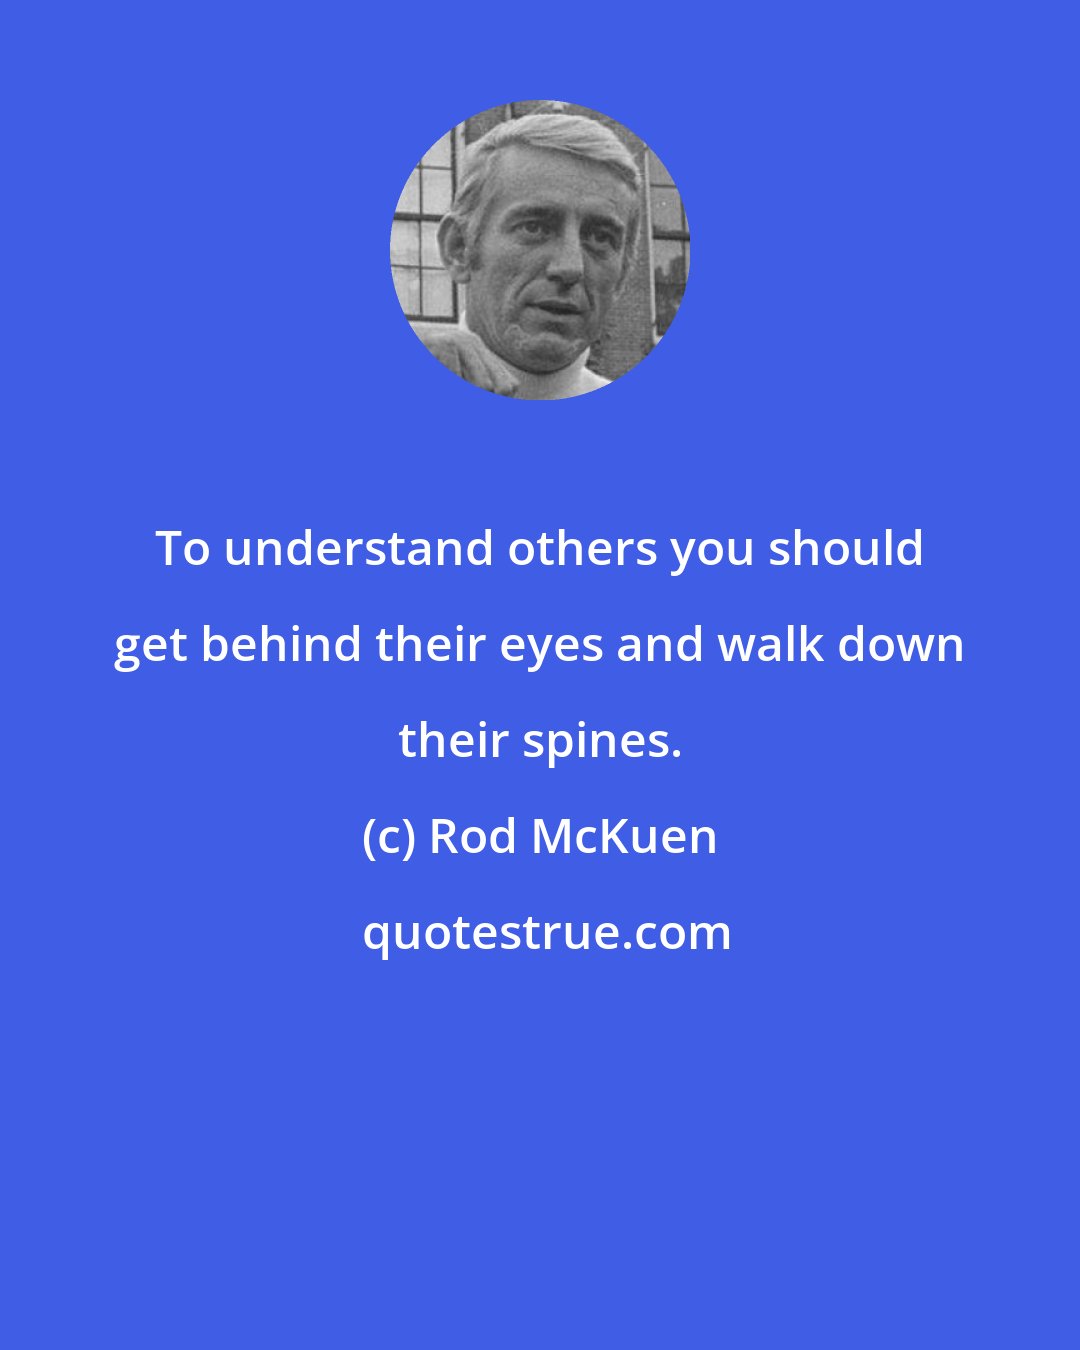 Rod McKuen: To understand others you should get behind their eyes and walk down their spines.